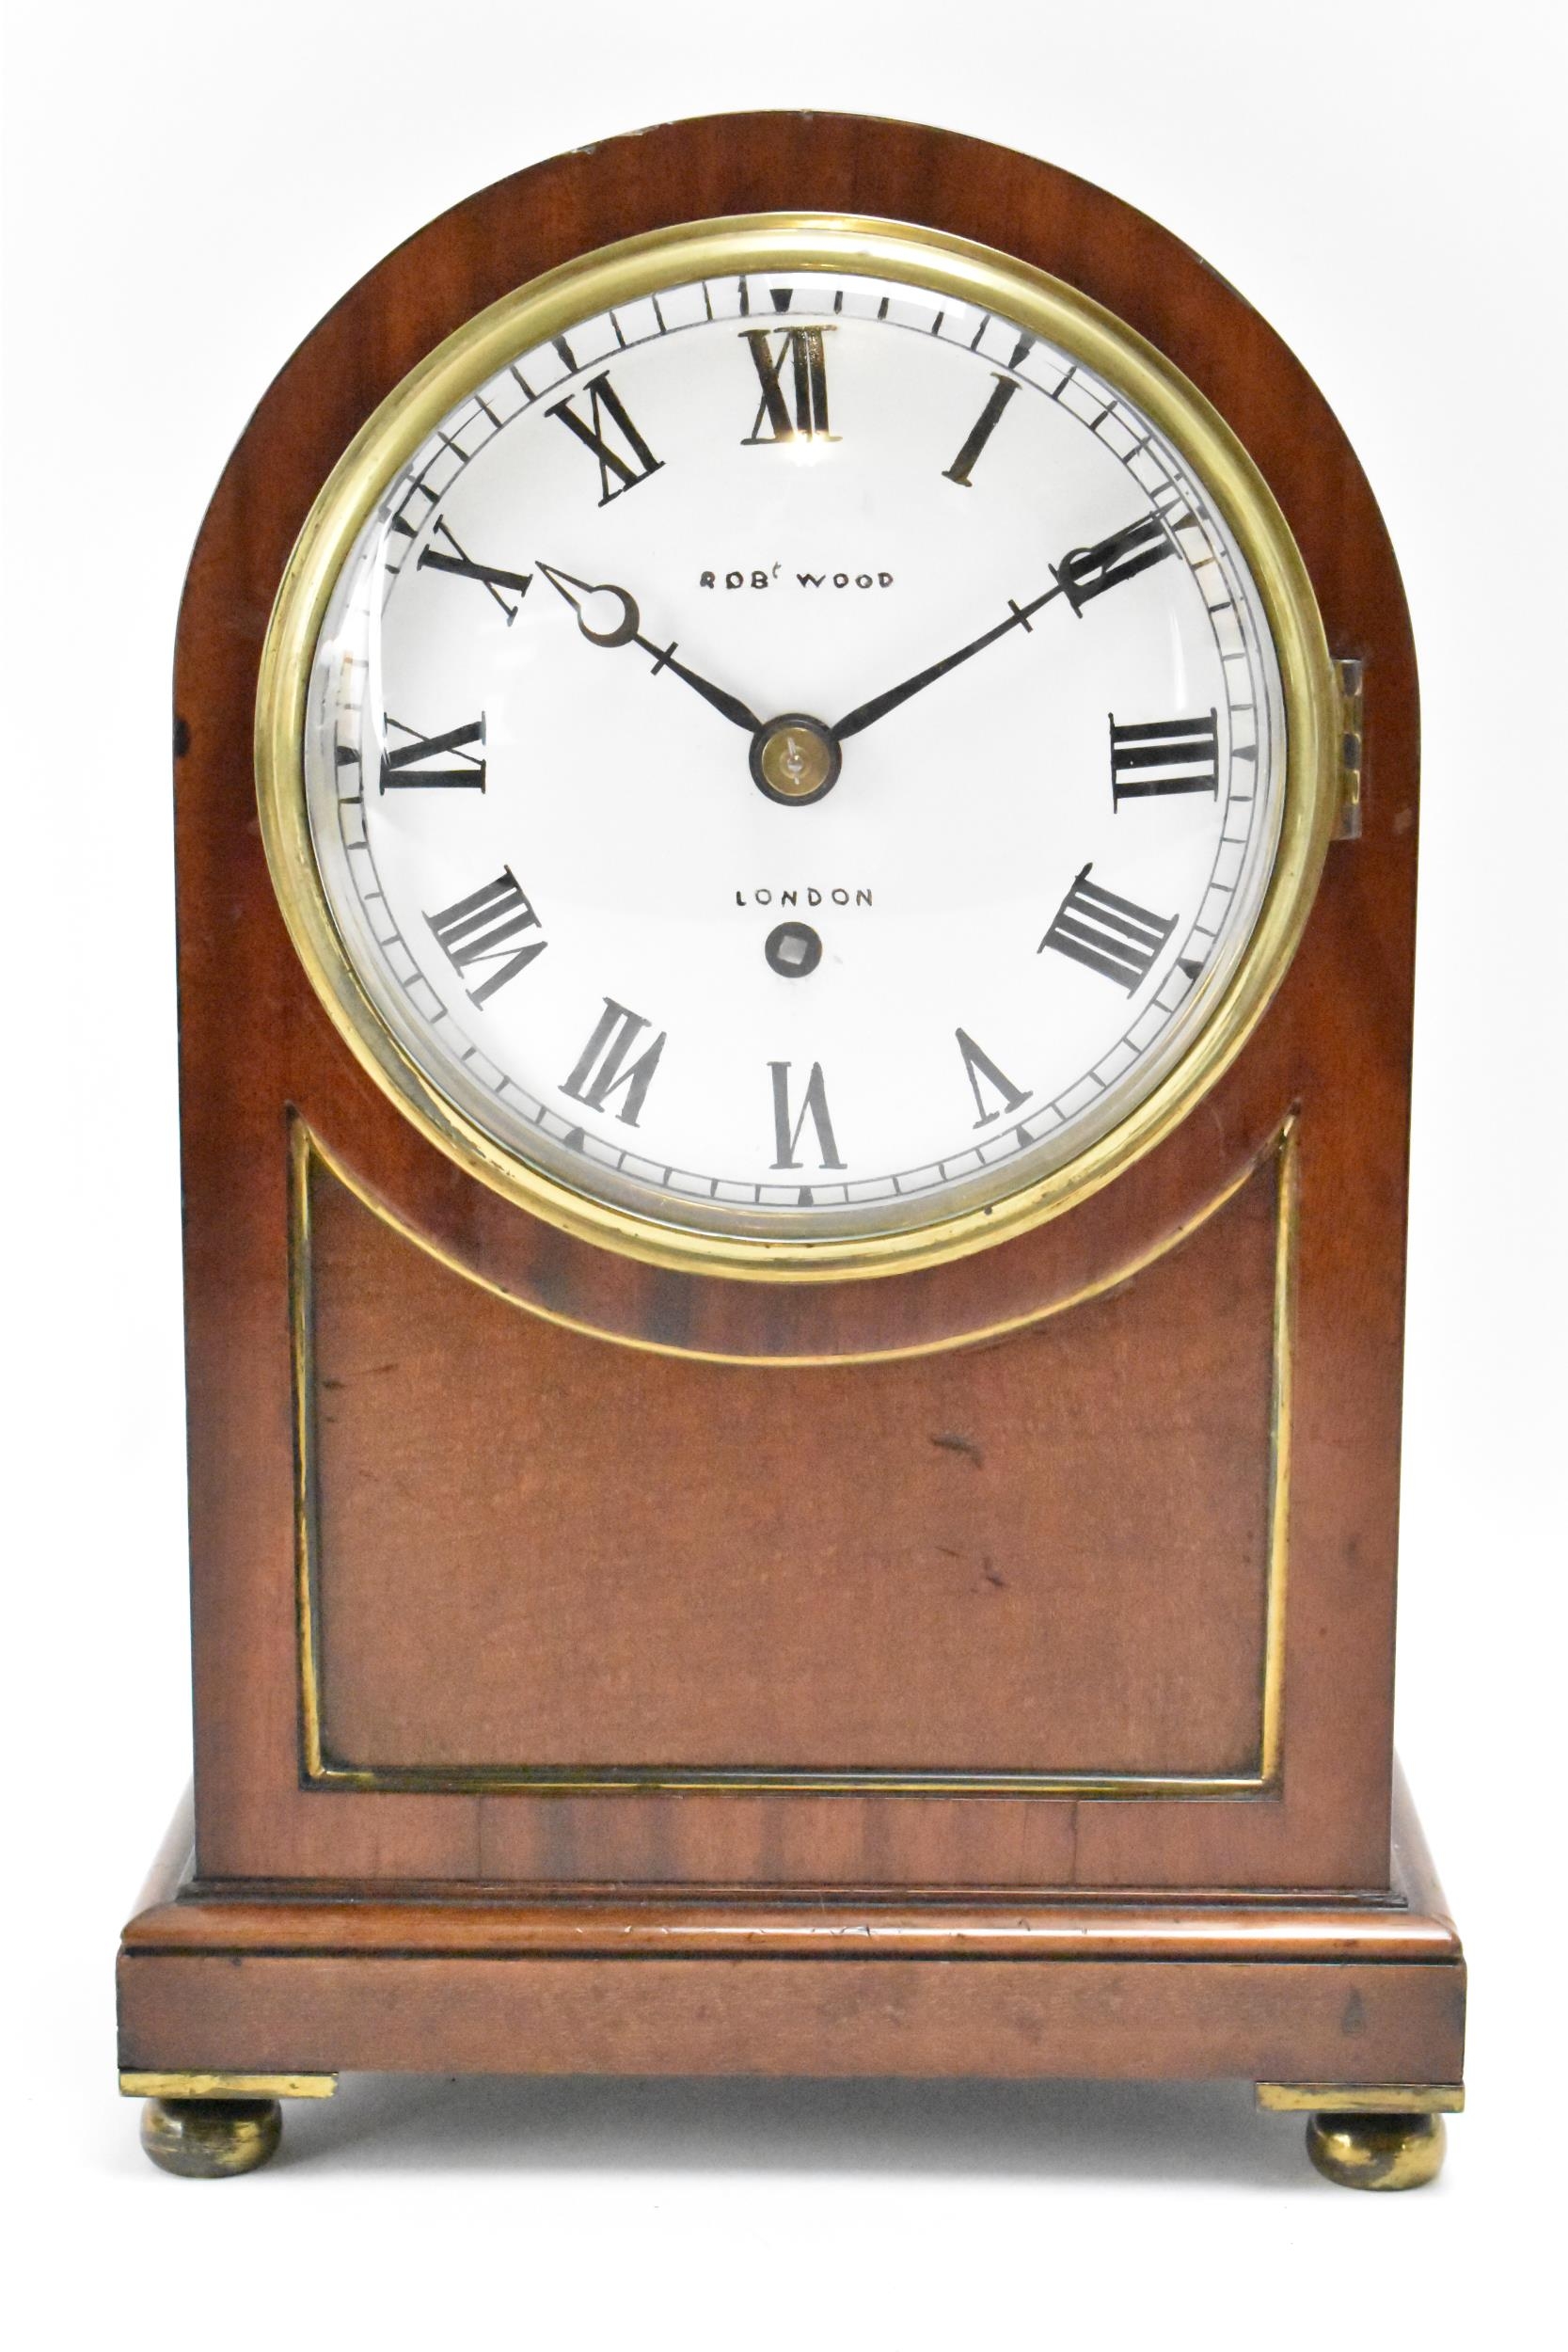 A 19th century mahogany bracket clock, the case having an arched top with gilt pierced side